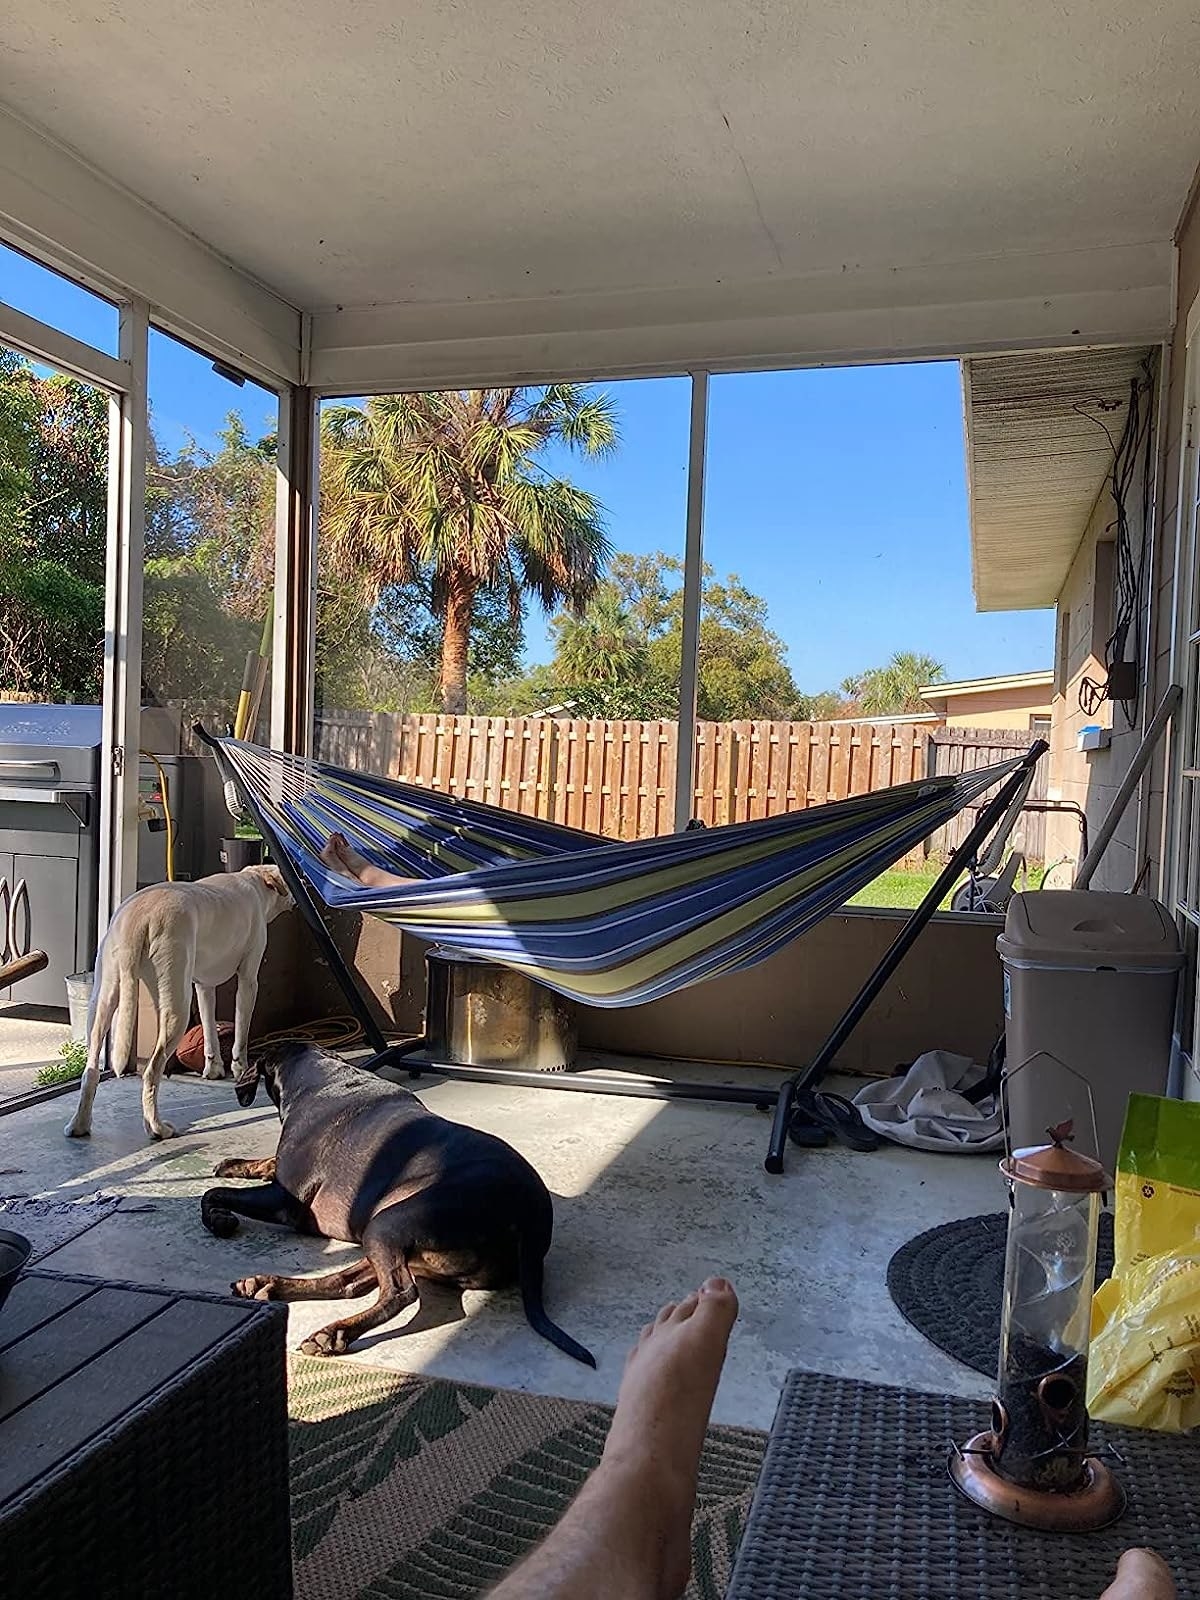 hammock set up on covered patio area with someone&#x27;s feet sticking out as they lounge